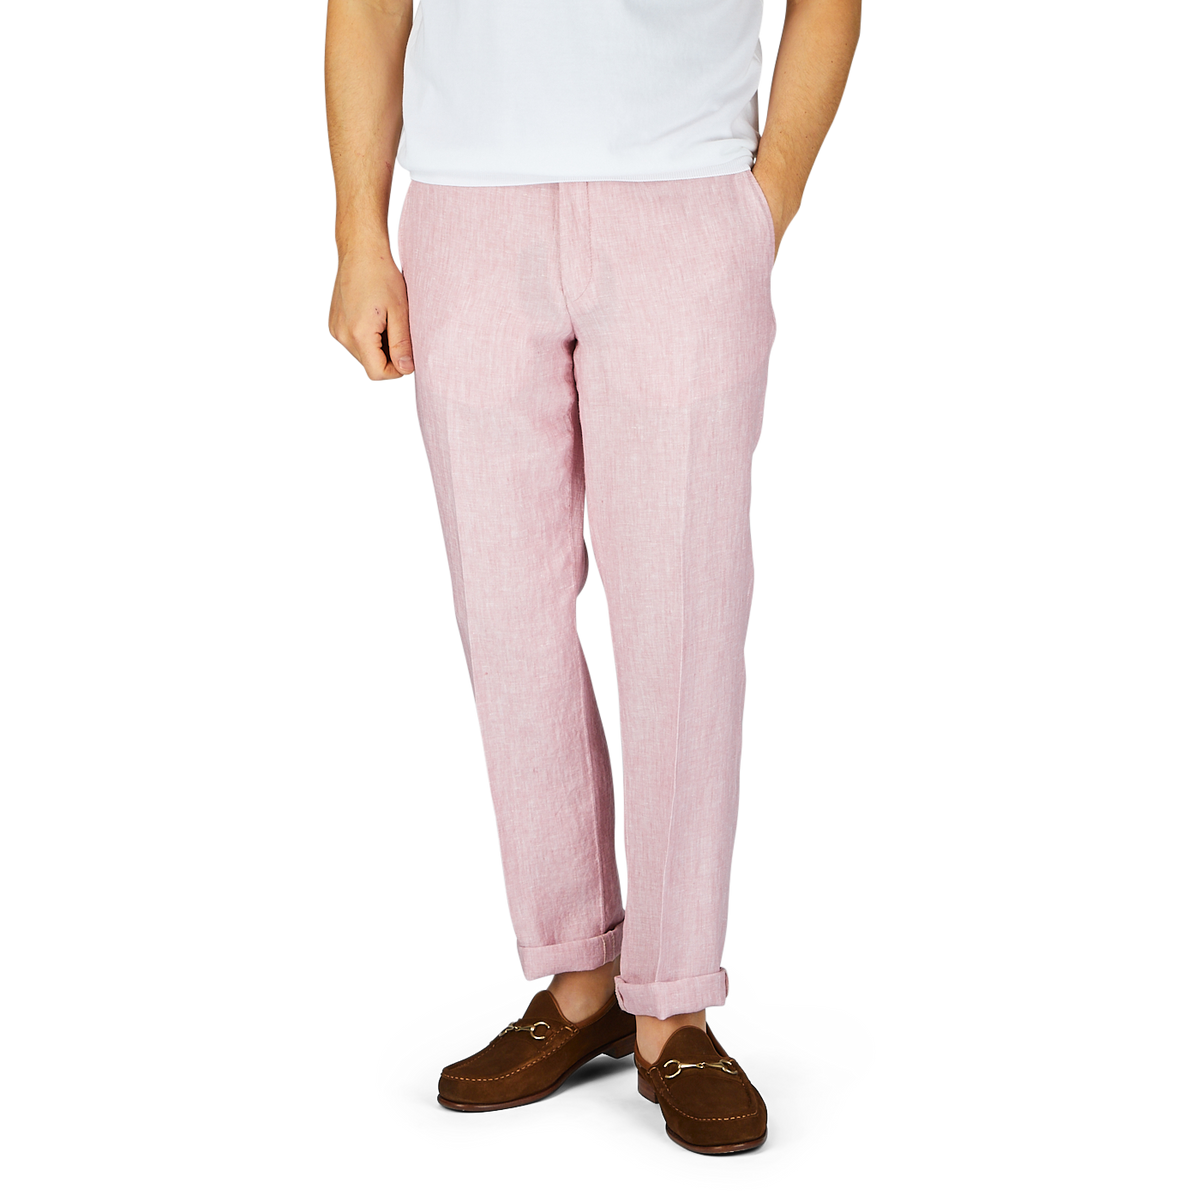 A person wearing Light Pink Washed Linen Regular Fit Chinos by Hiltl and brown loafers standing against a plain background.